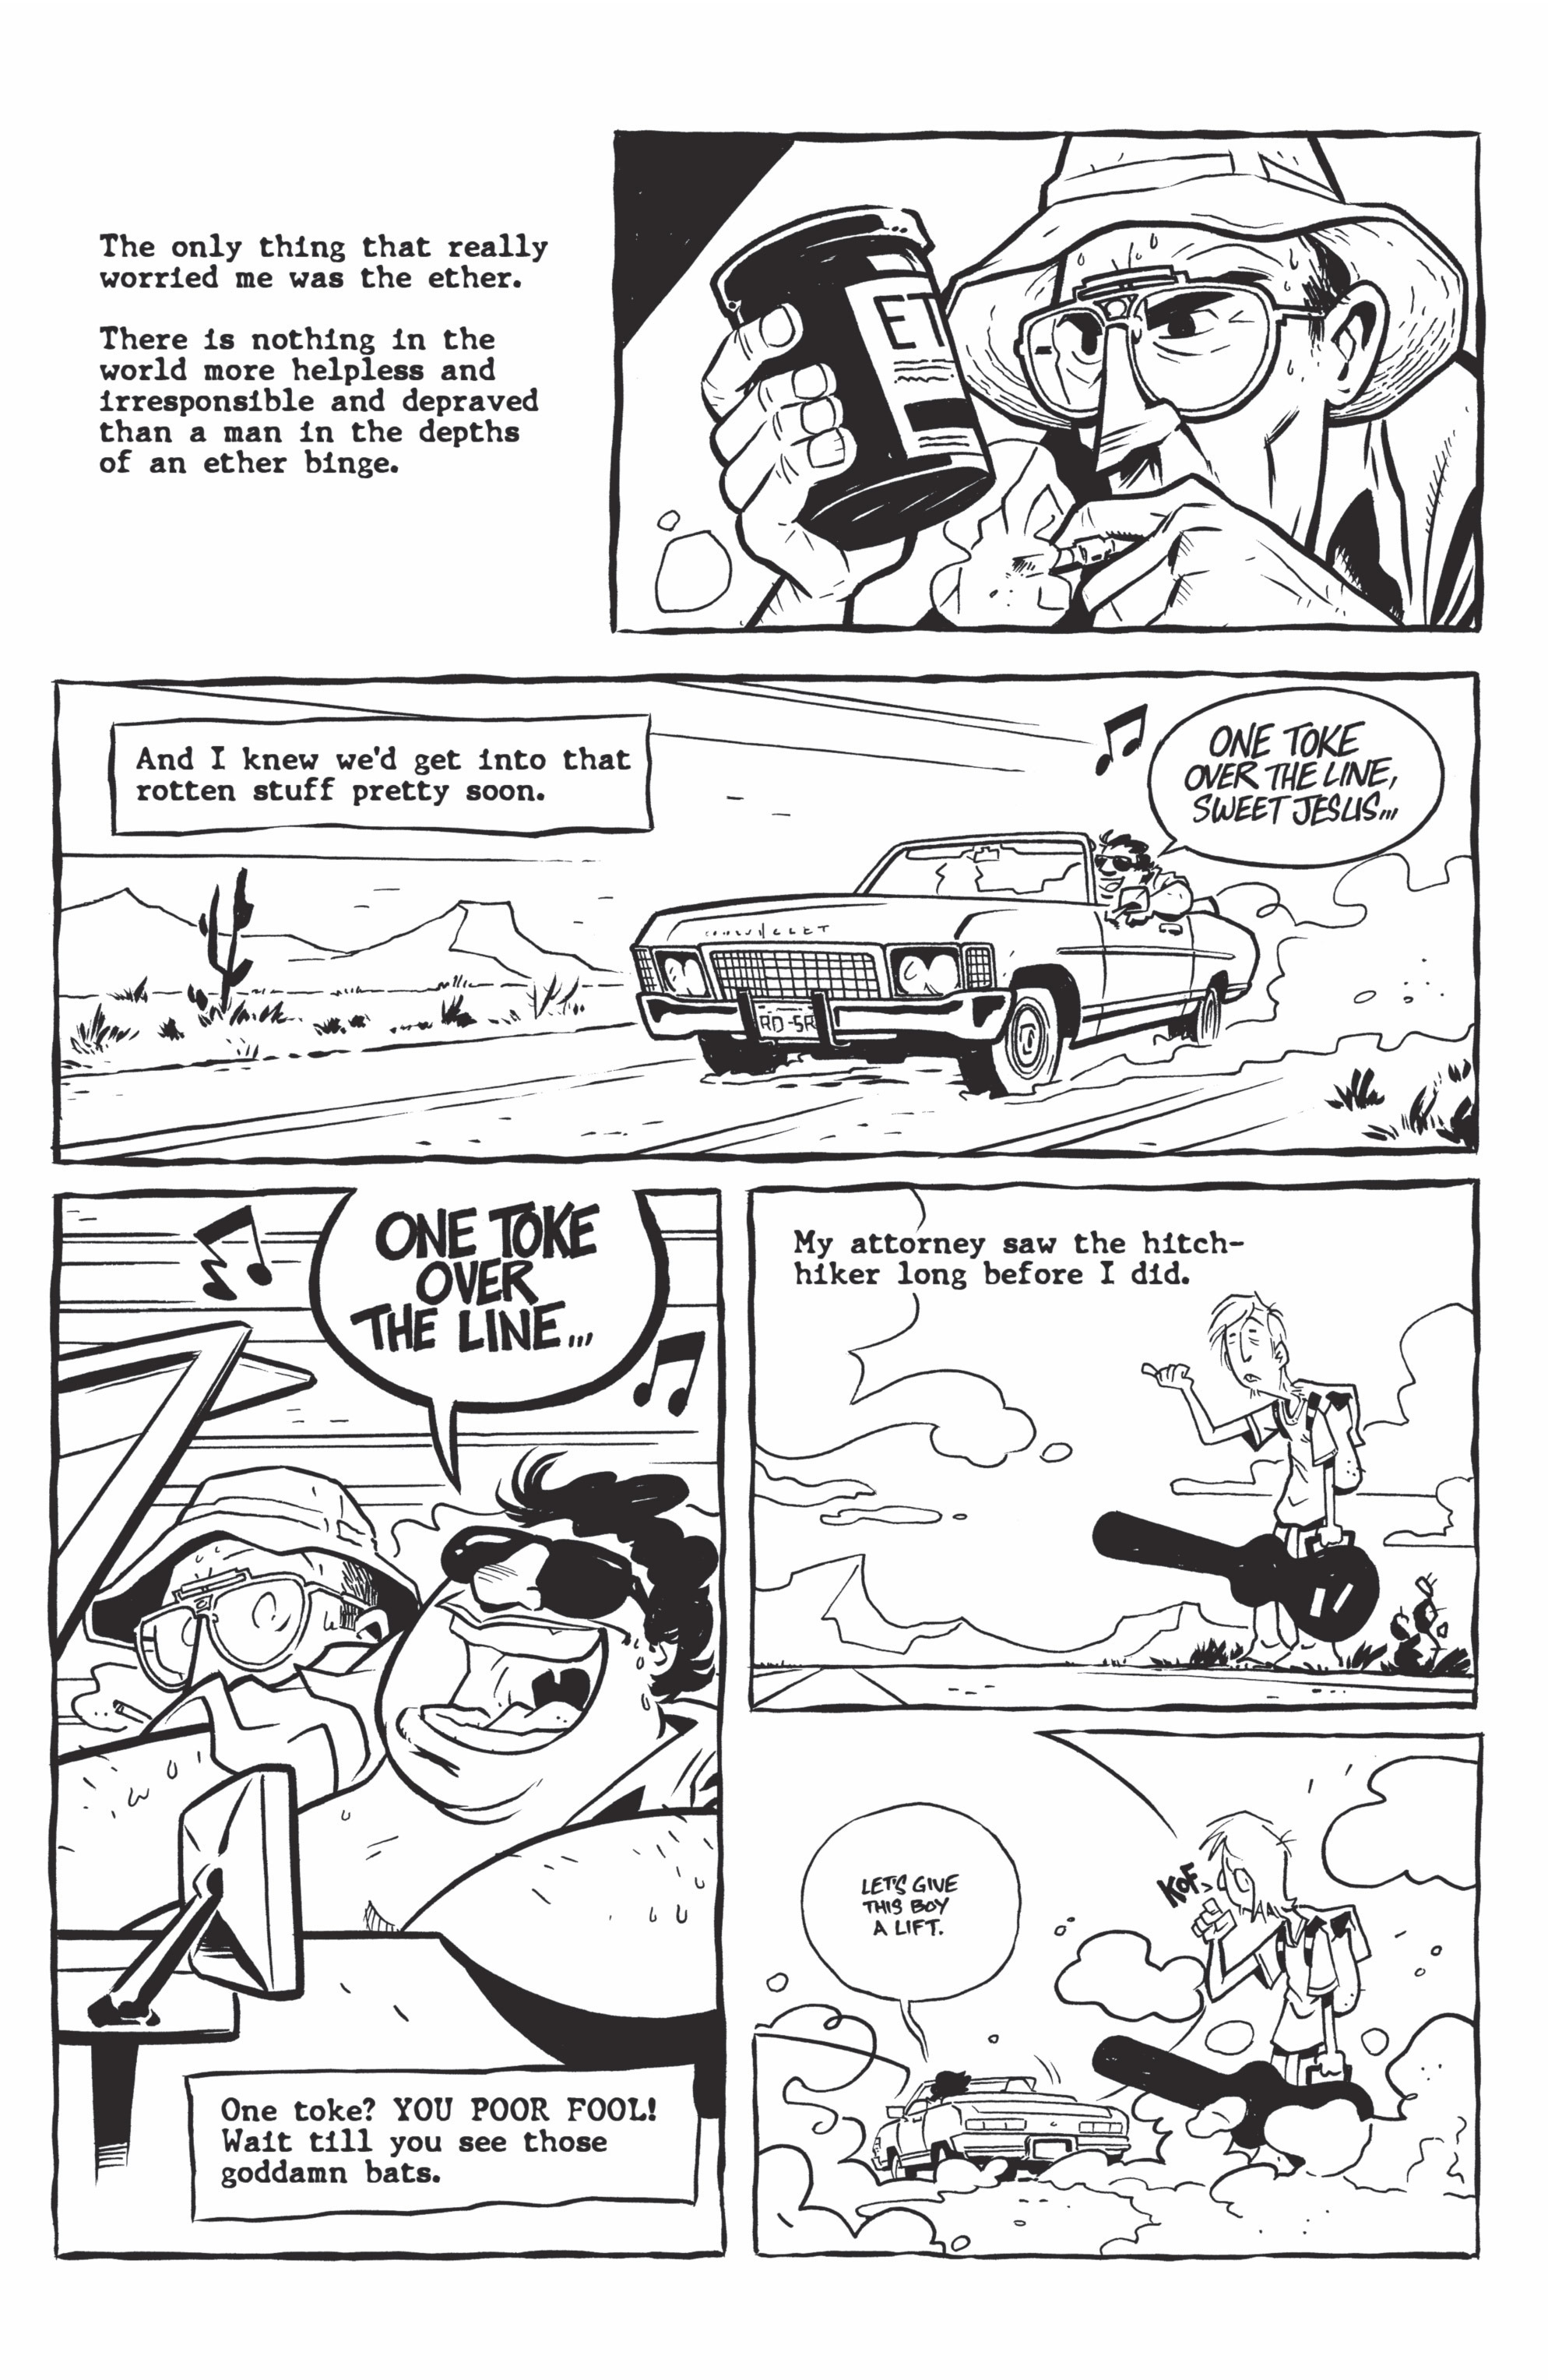 Read online Hunter S. Thompson's Fear and Loathing in Las Vegas comic -  Issue #1 - 7